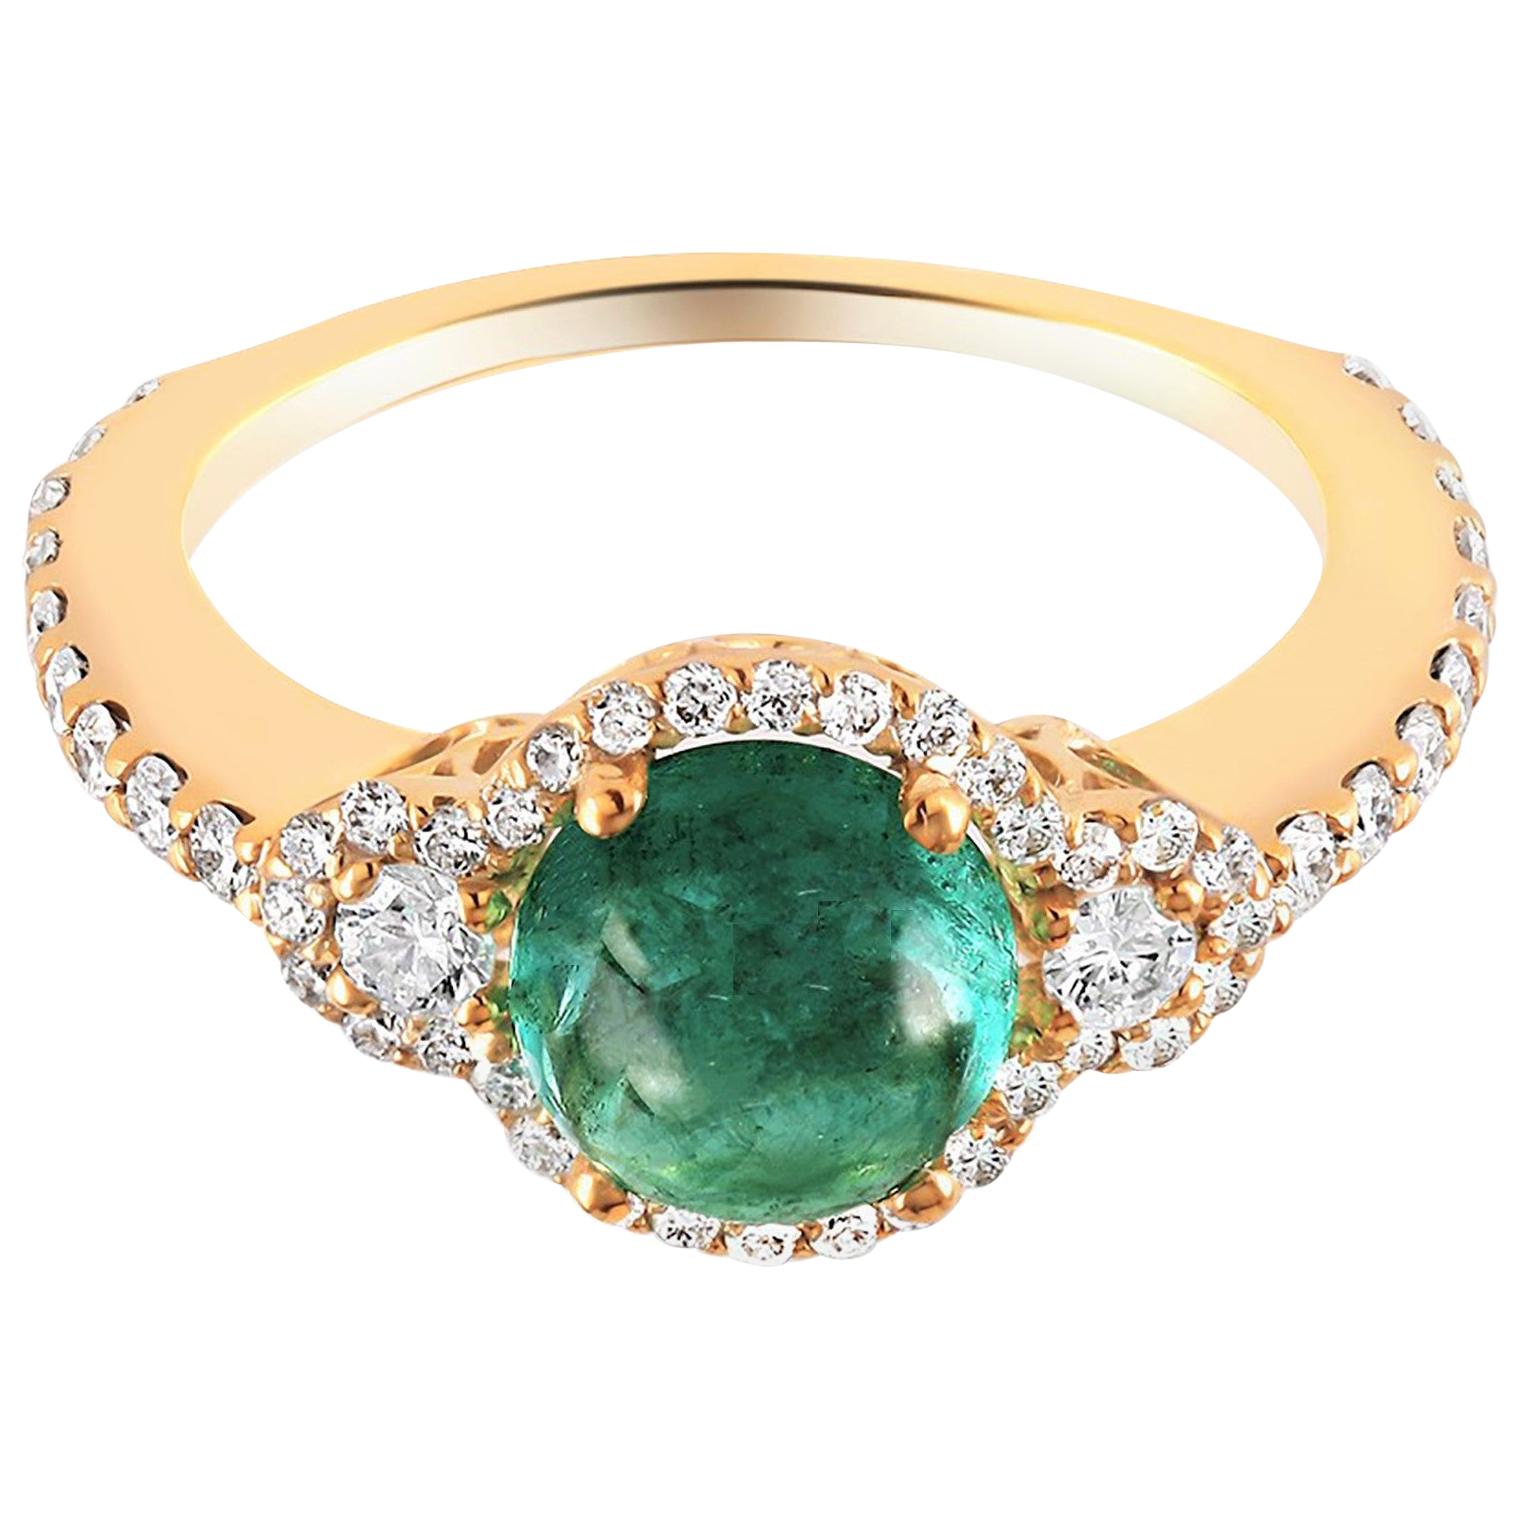 Cabochon Emerald and Diamond Cluster Yellow Gold Ring Weighing 3.60 Carat